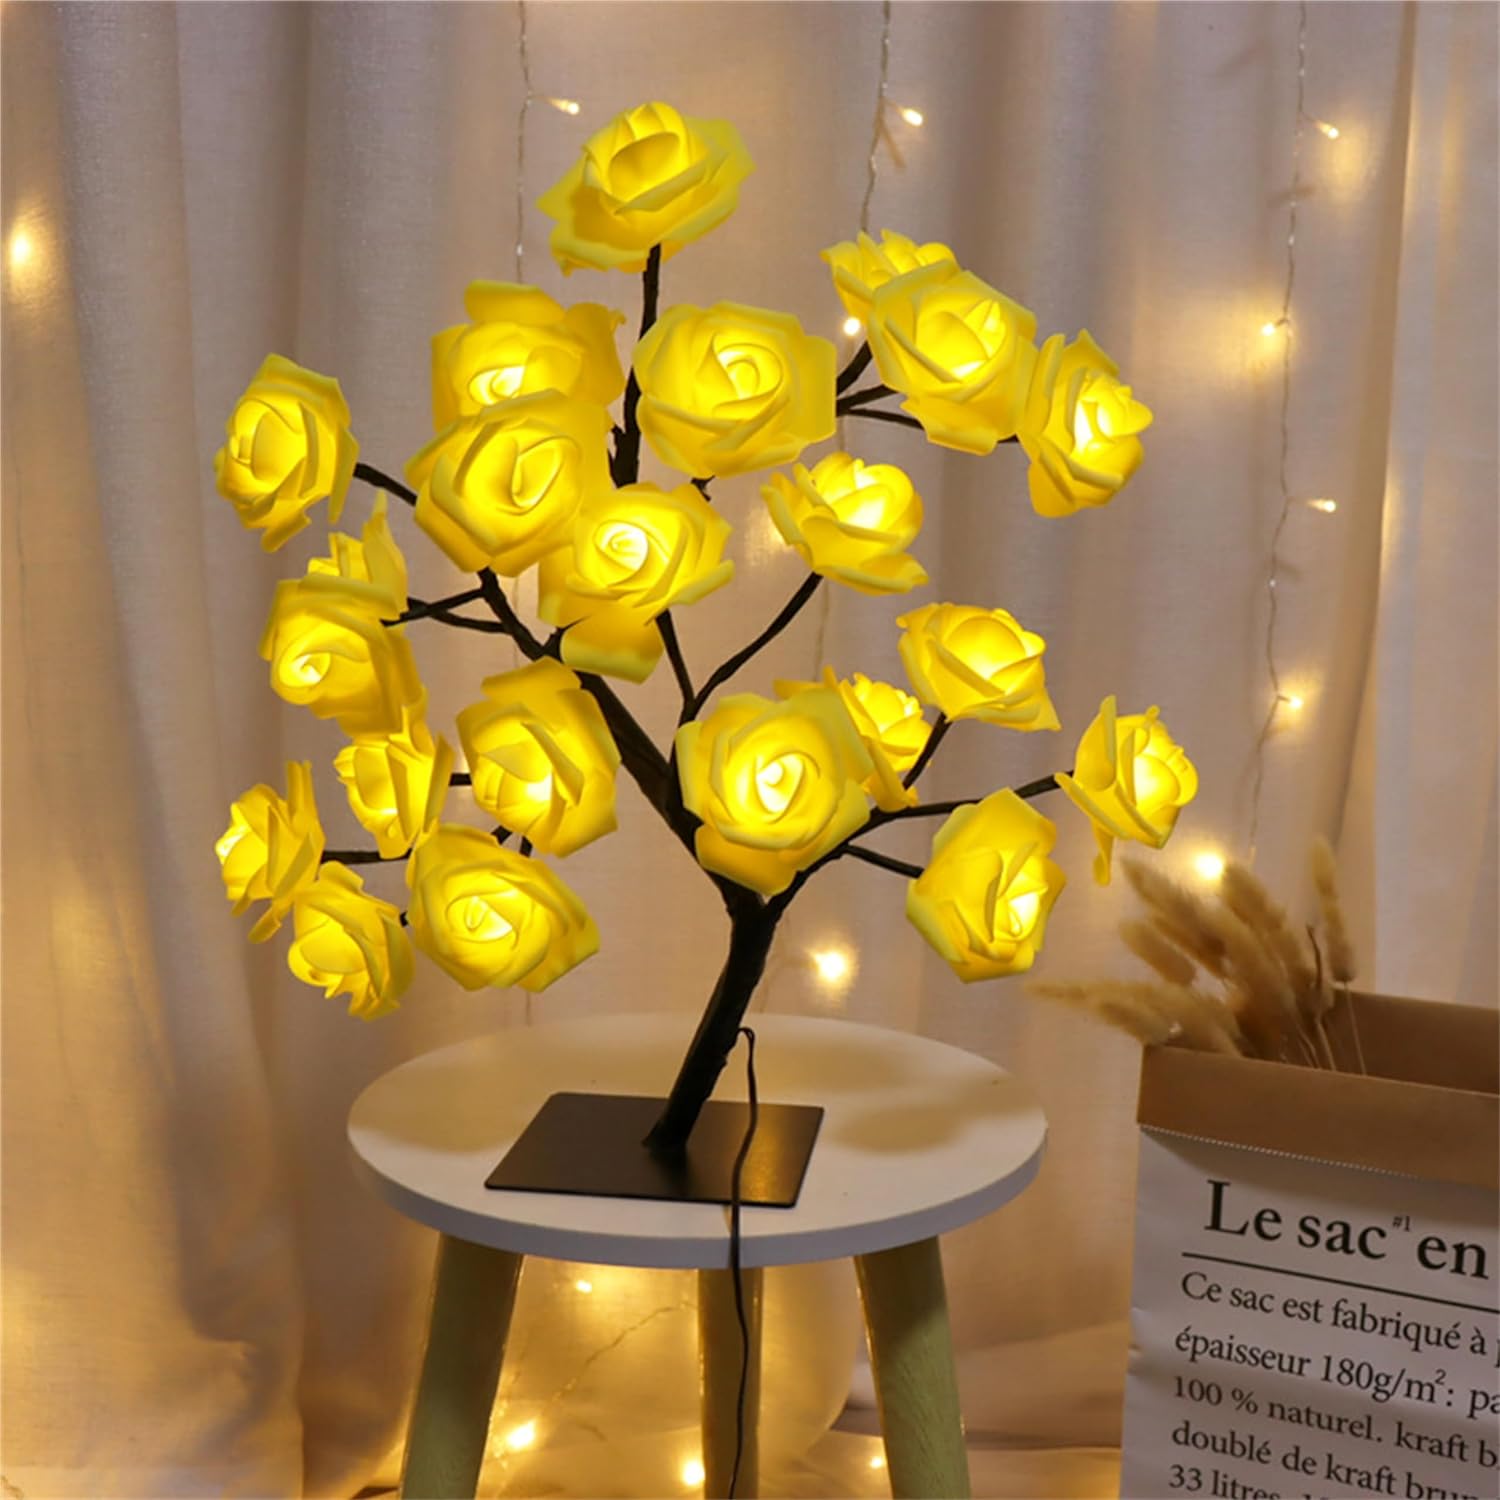 XVICO LED Desk Lamps LED Rose Tree Lamp Artificial Bonsai Tree Night Light Centerpiece Fairy Light for Home Bedroom Valentines Day Easter Wedding Party Decor LED Desk Light (Yellow) 2